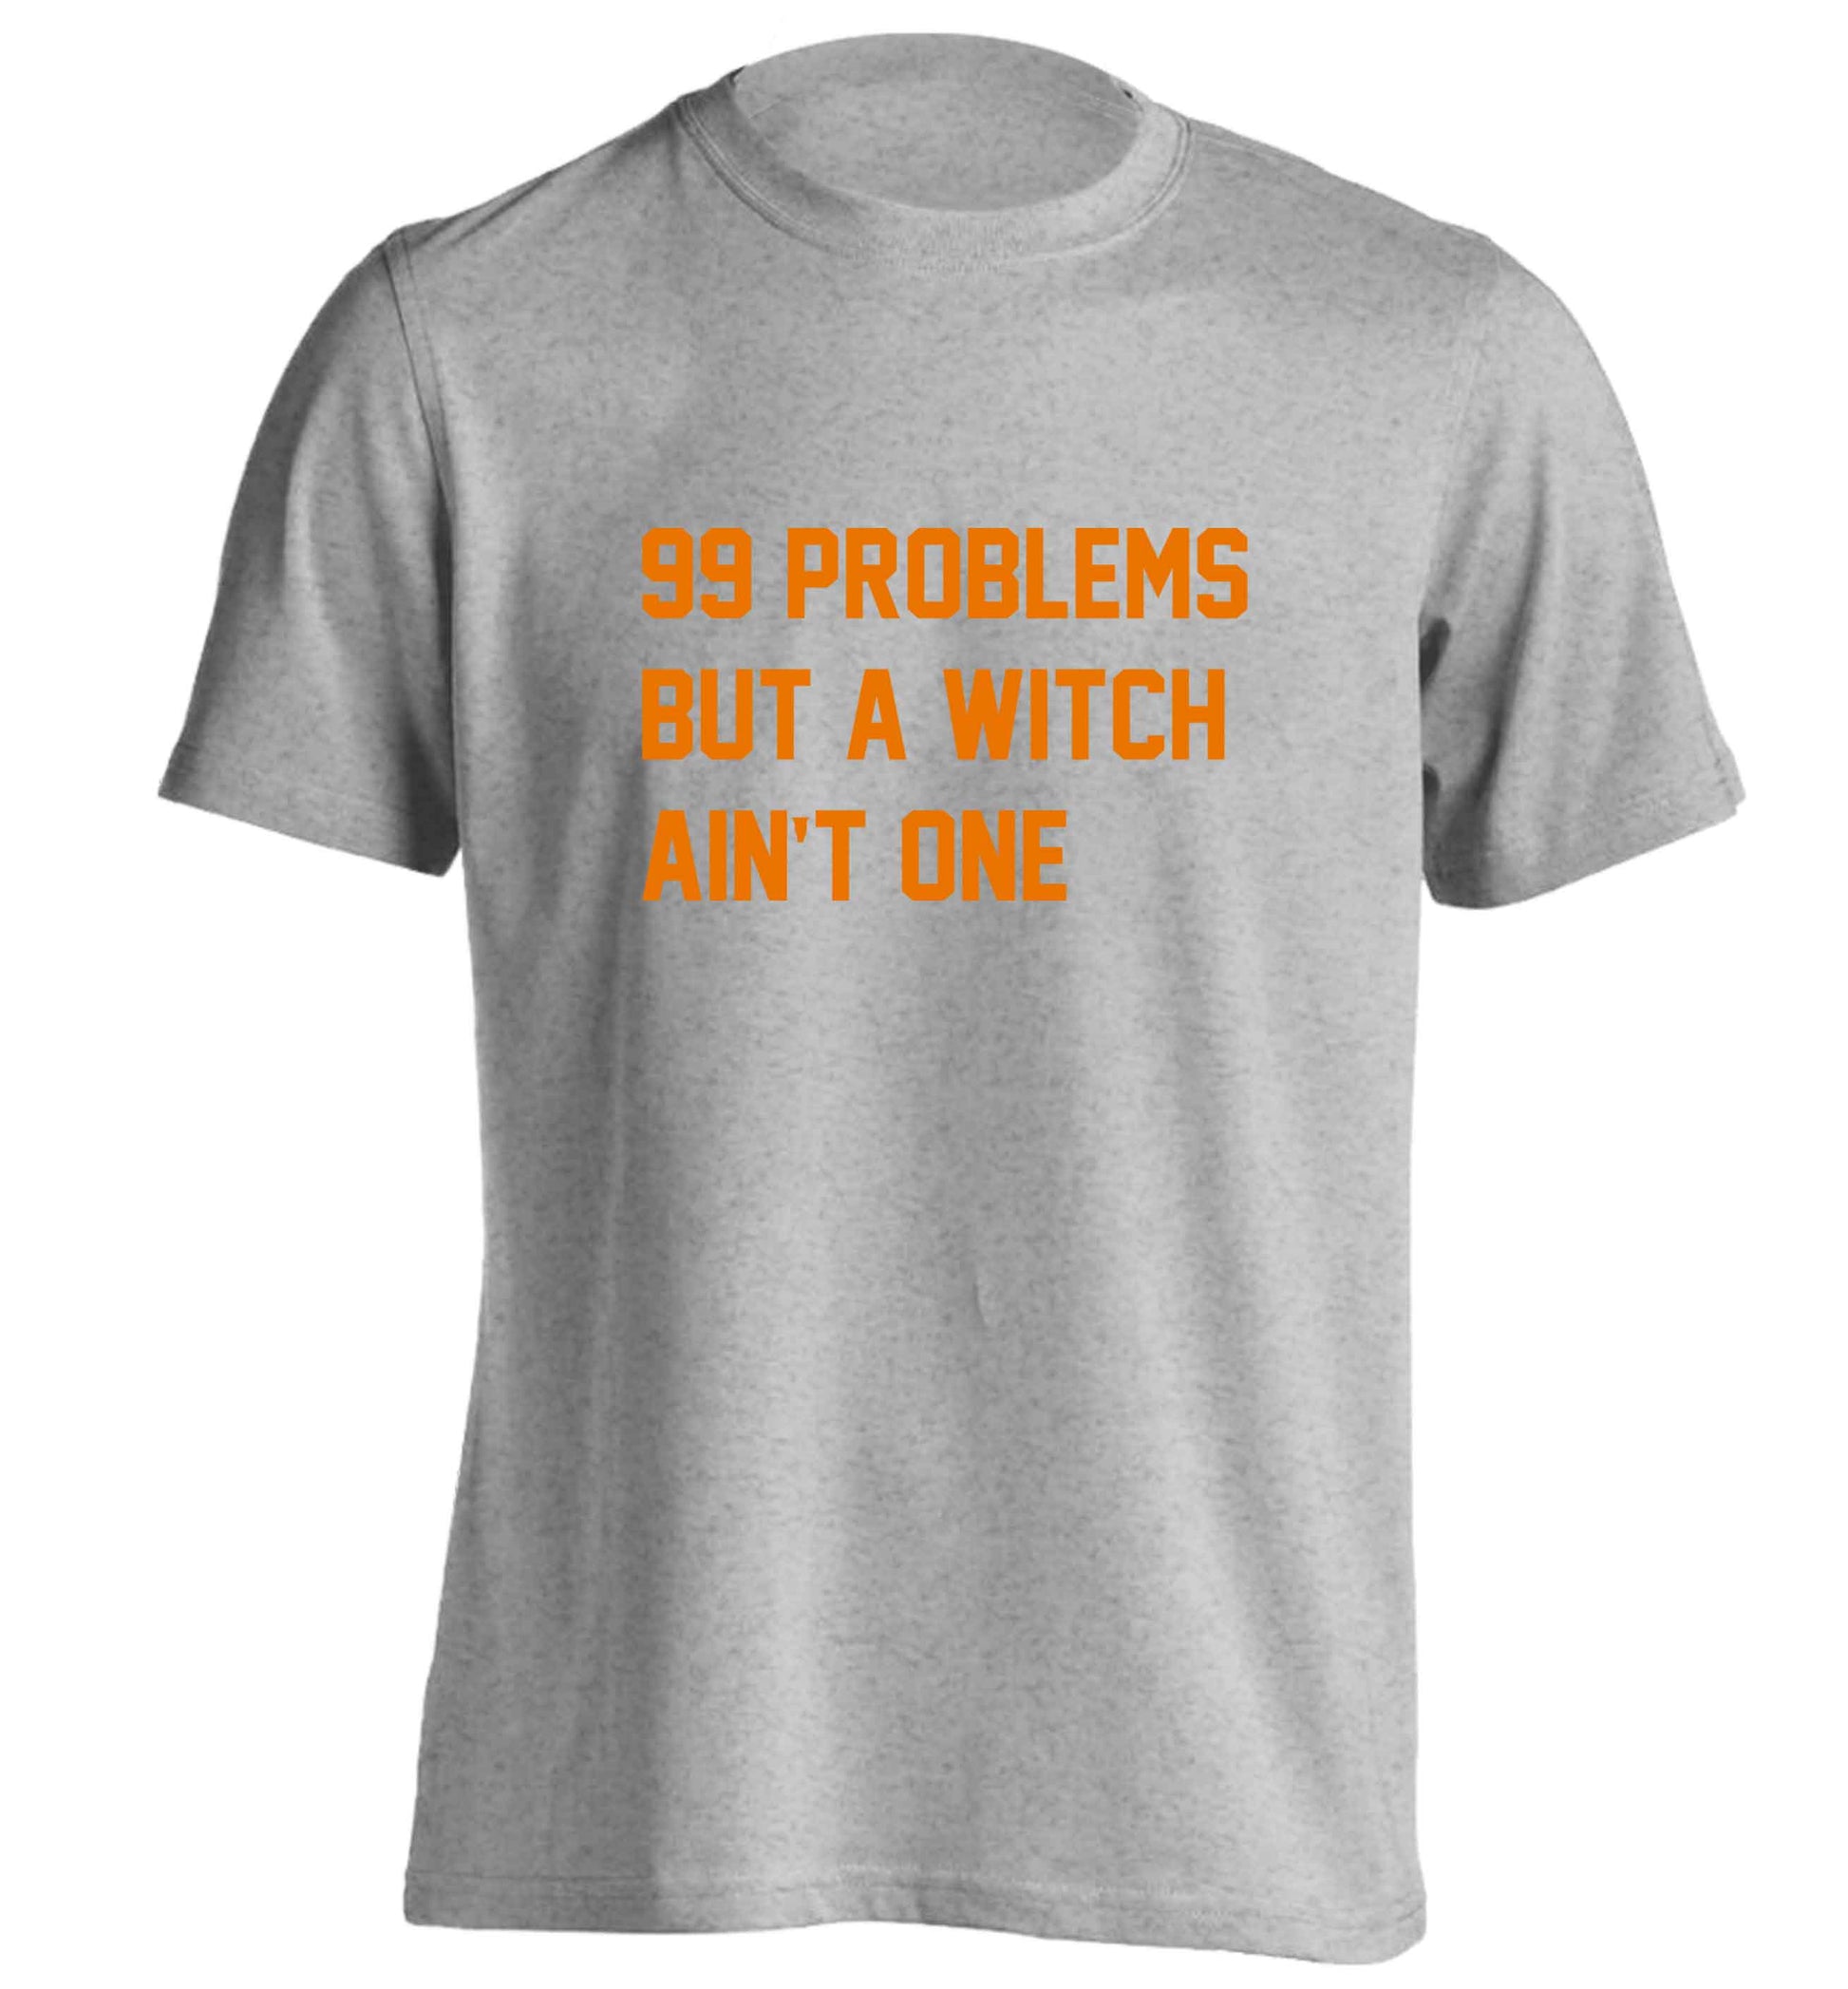 99 Problems but a witch aint one adults unisex grey Tshirt 2XL